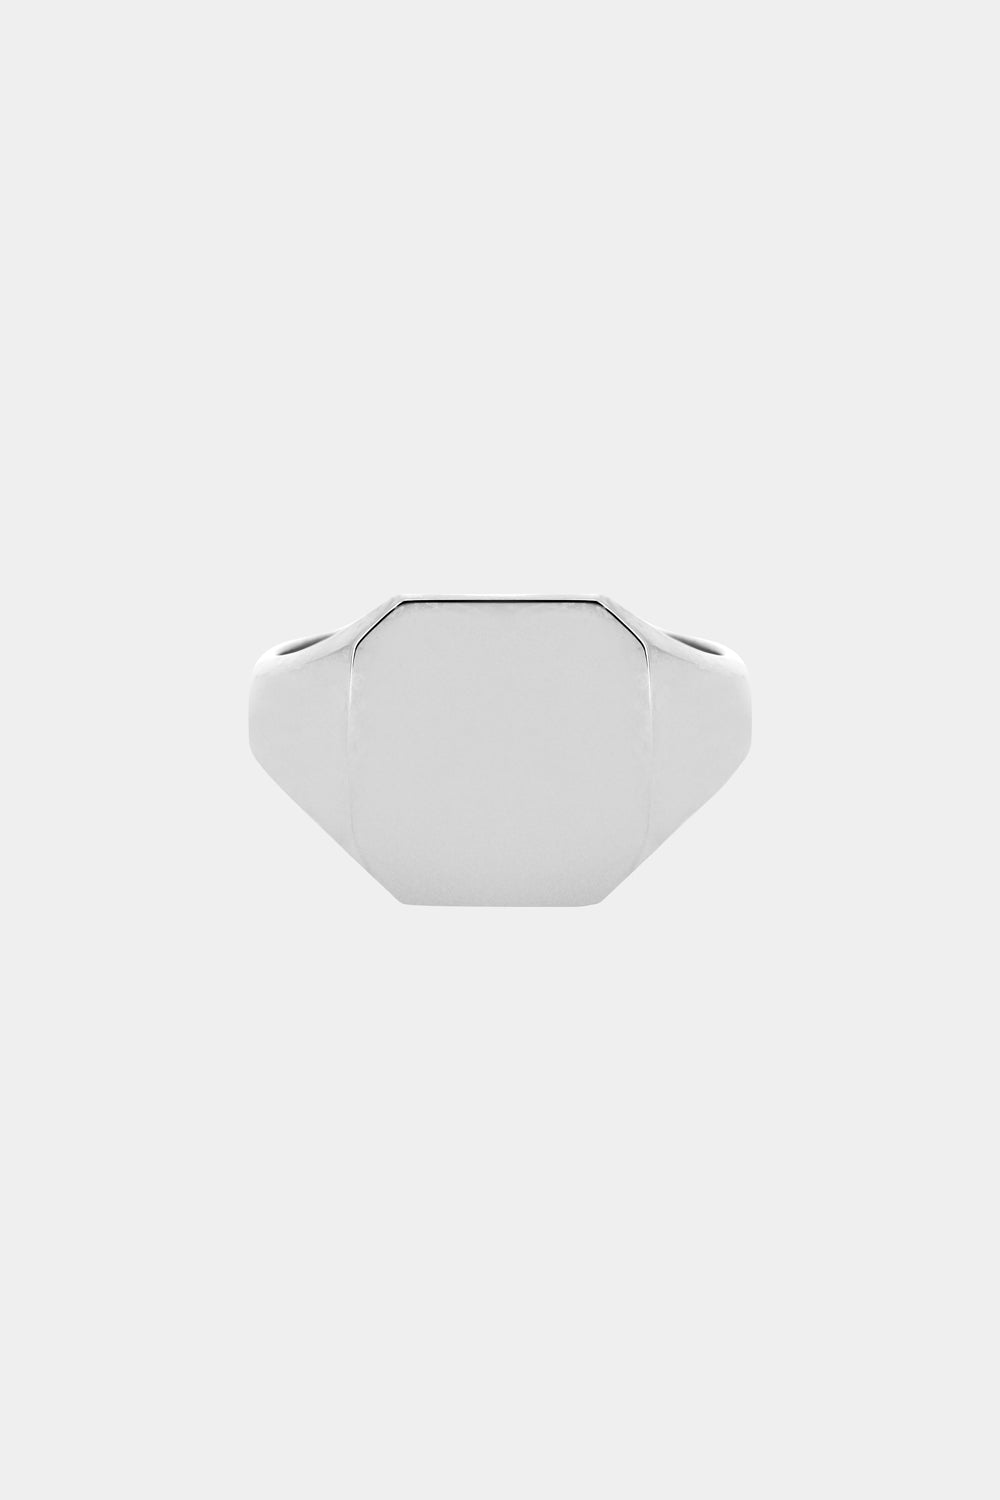 Tallows Signet Ring | Silver or White Gold, More Options Available| Natasha Schweitzer